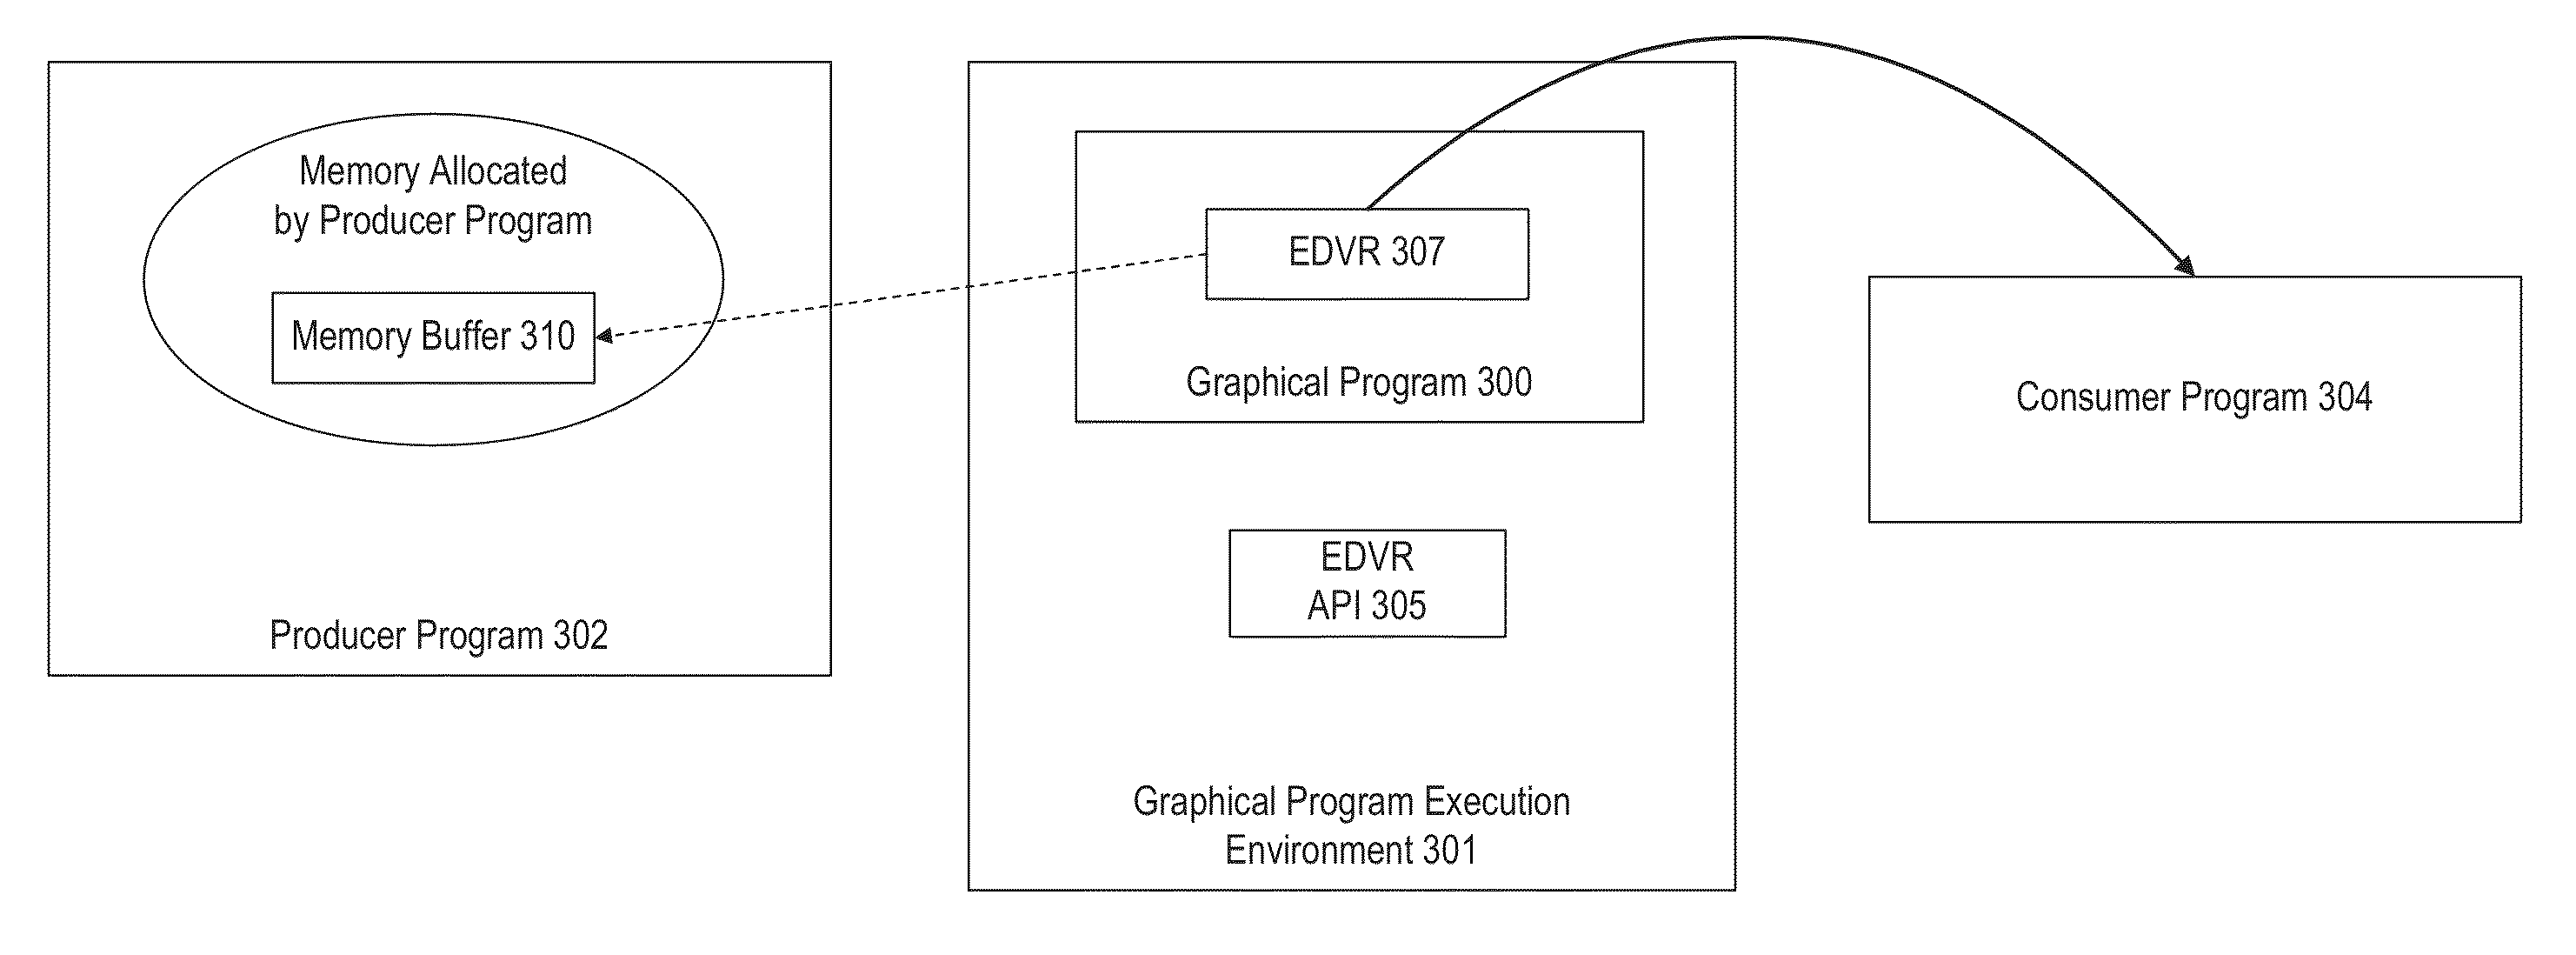 Graphical Programming System enabling Data Sharing from a Producer to a Consumer via a Memory Buffer